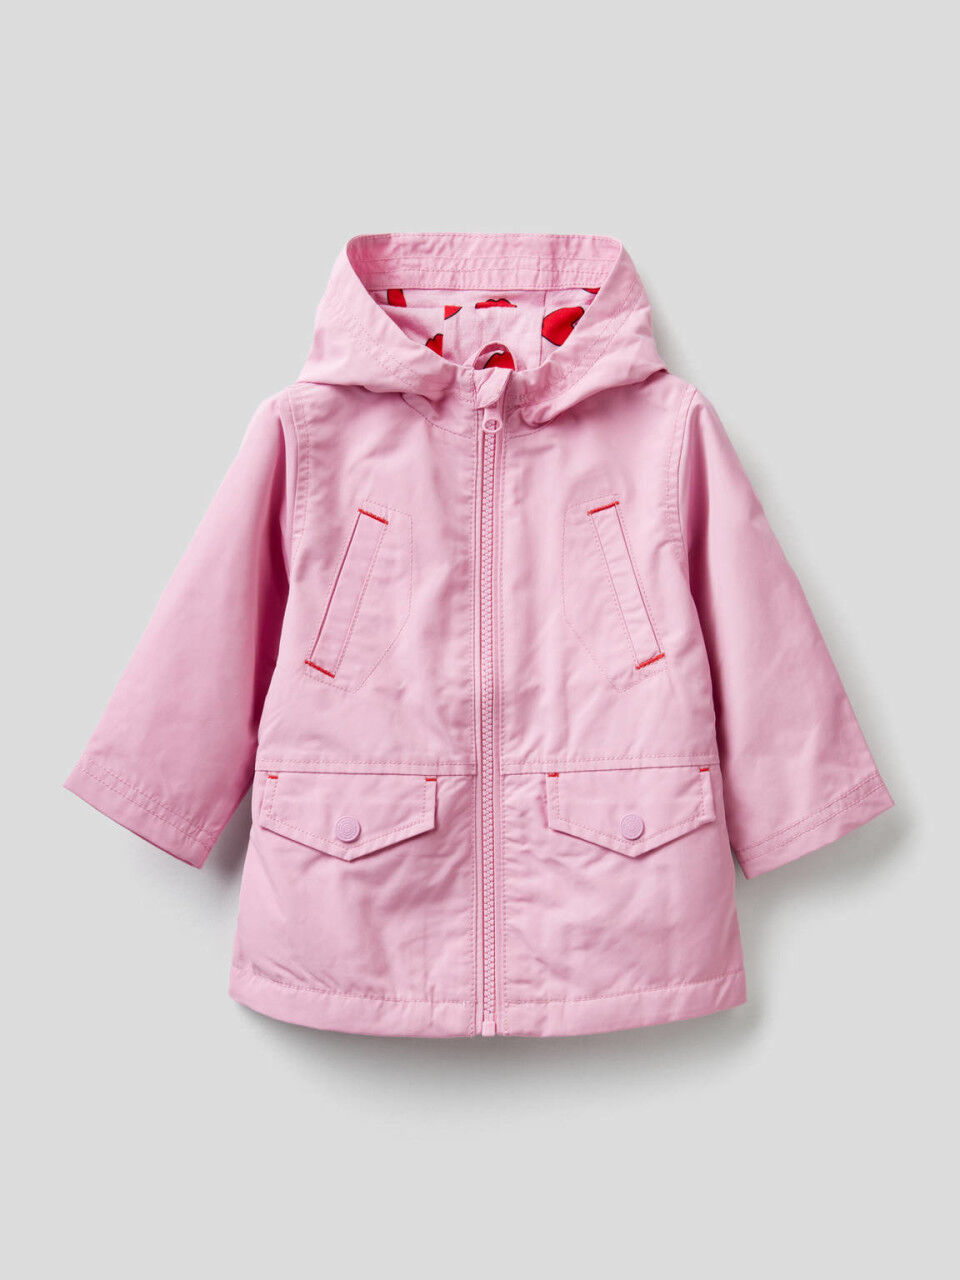 Kid Girls' Jackets and Coats Collection 2021 | Benetton